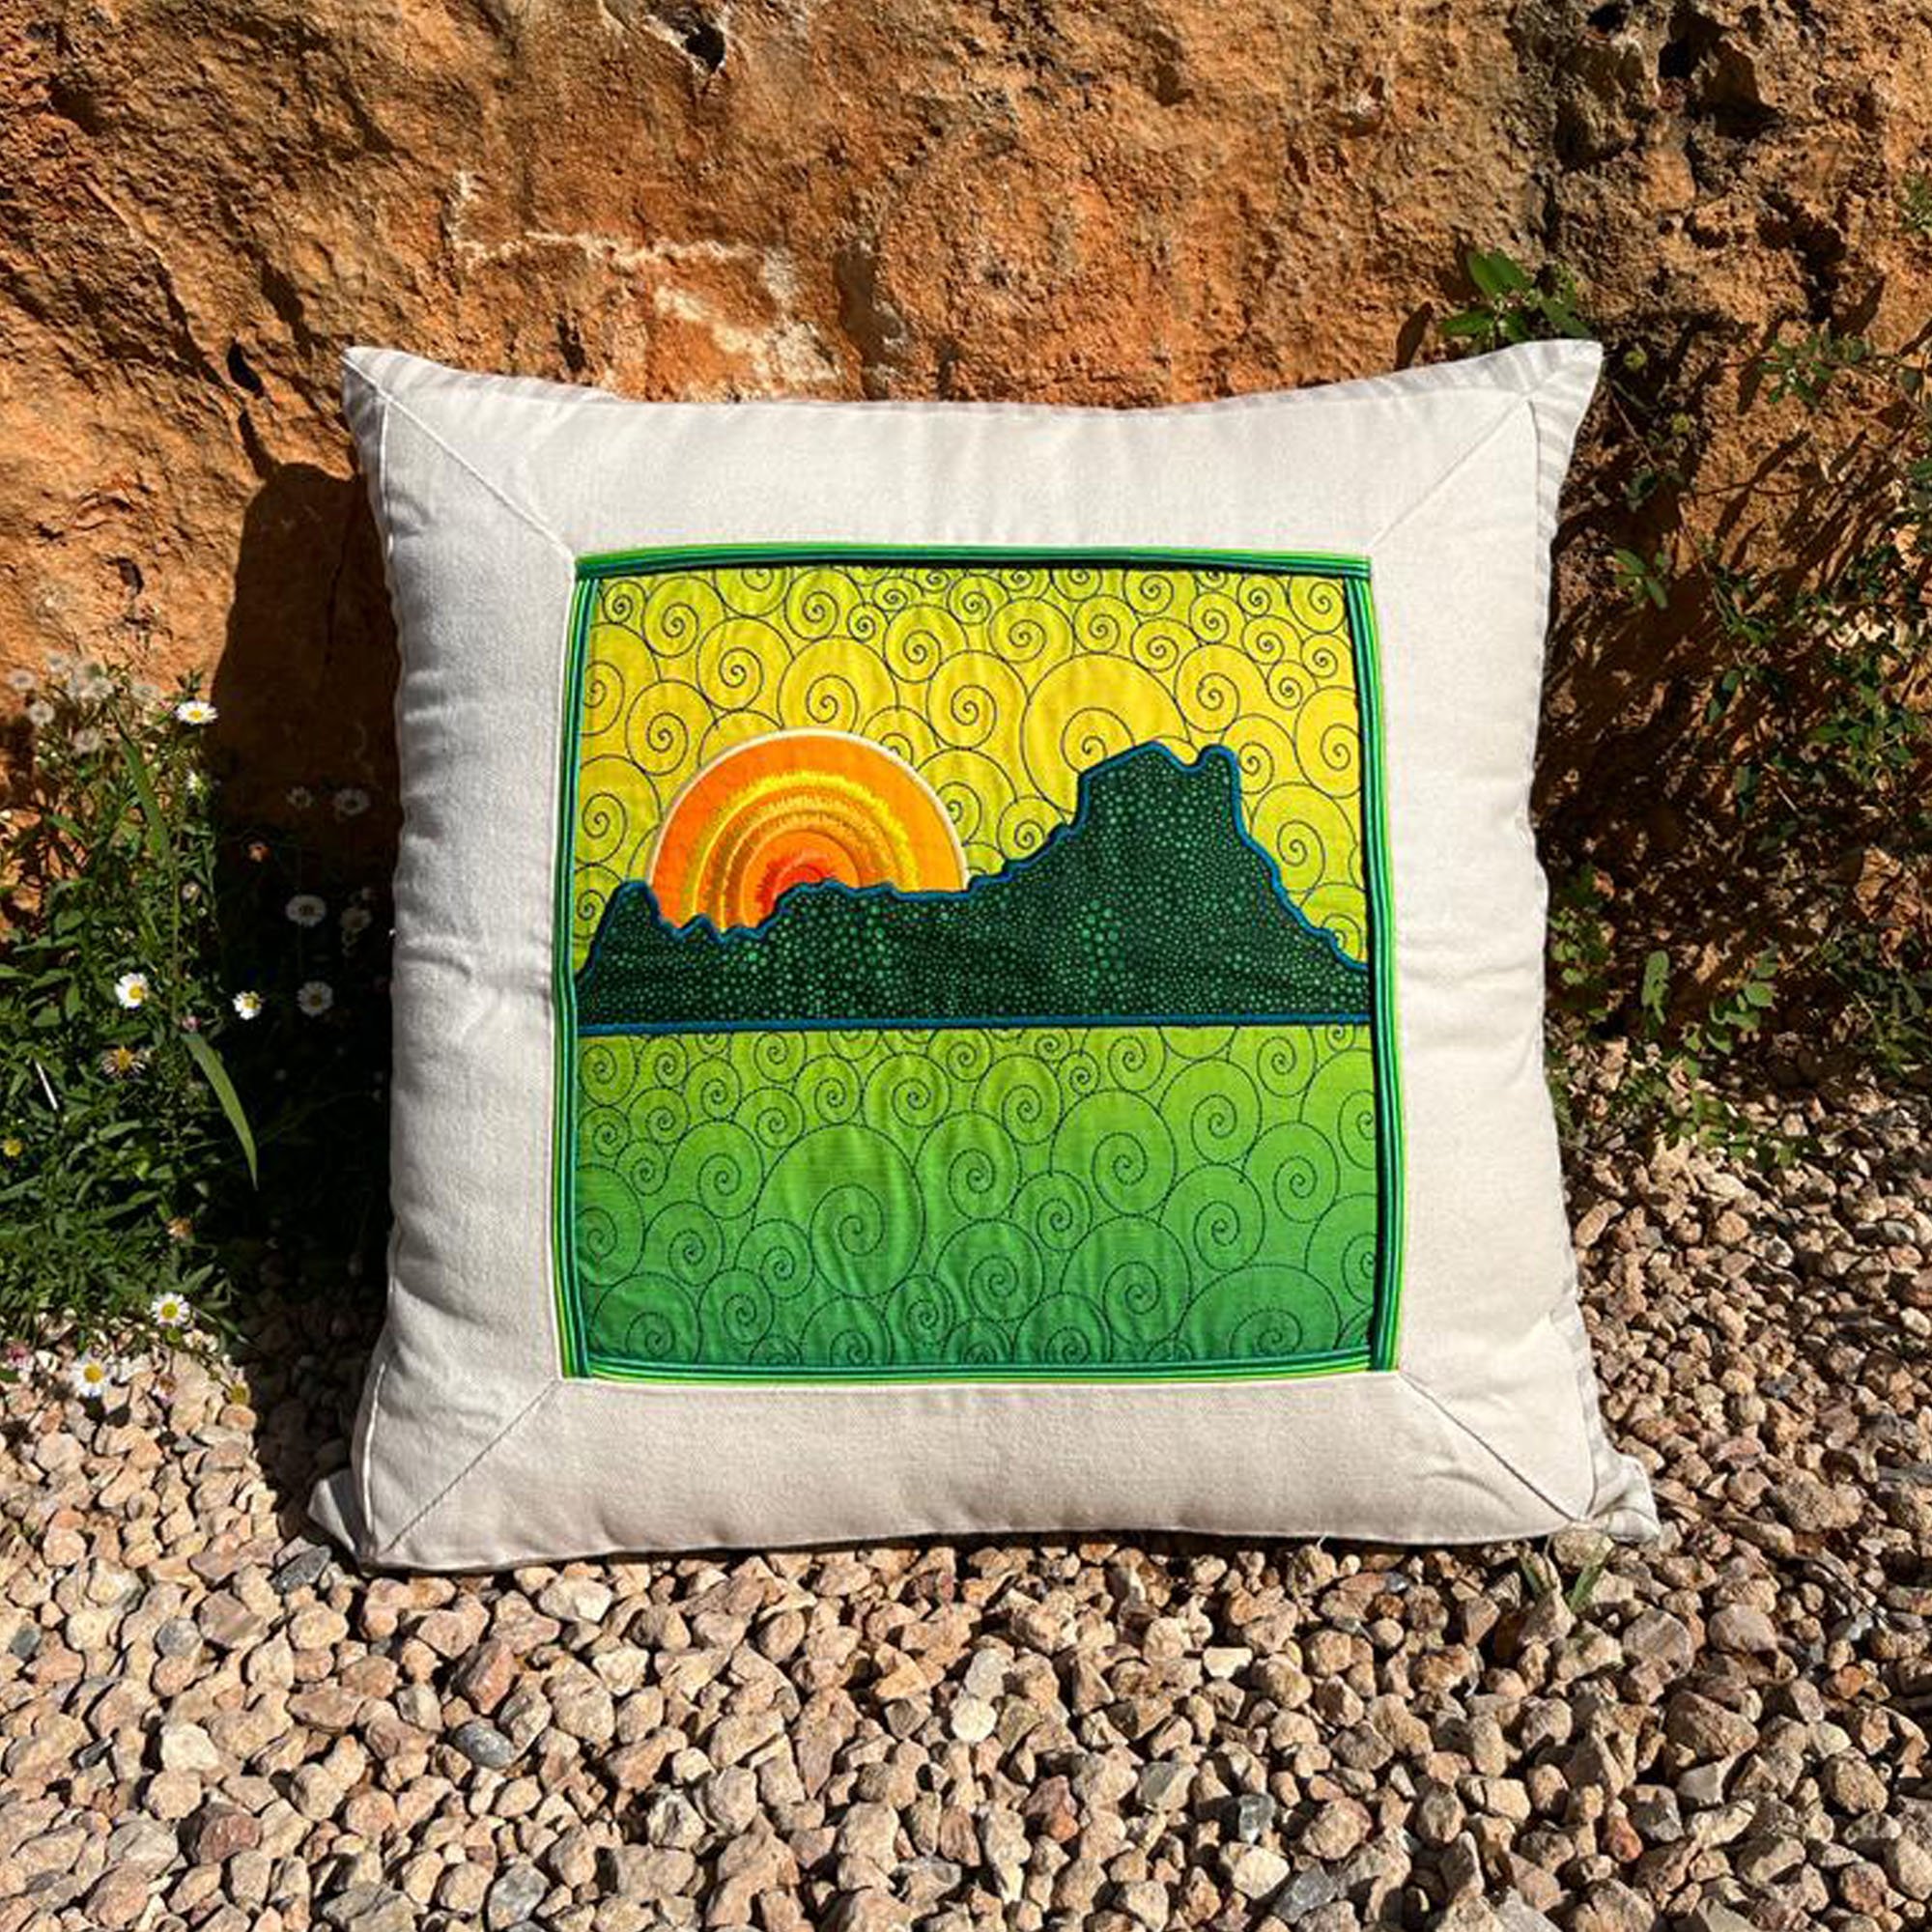 Es Vedrà Embroidered Cushion Cover